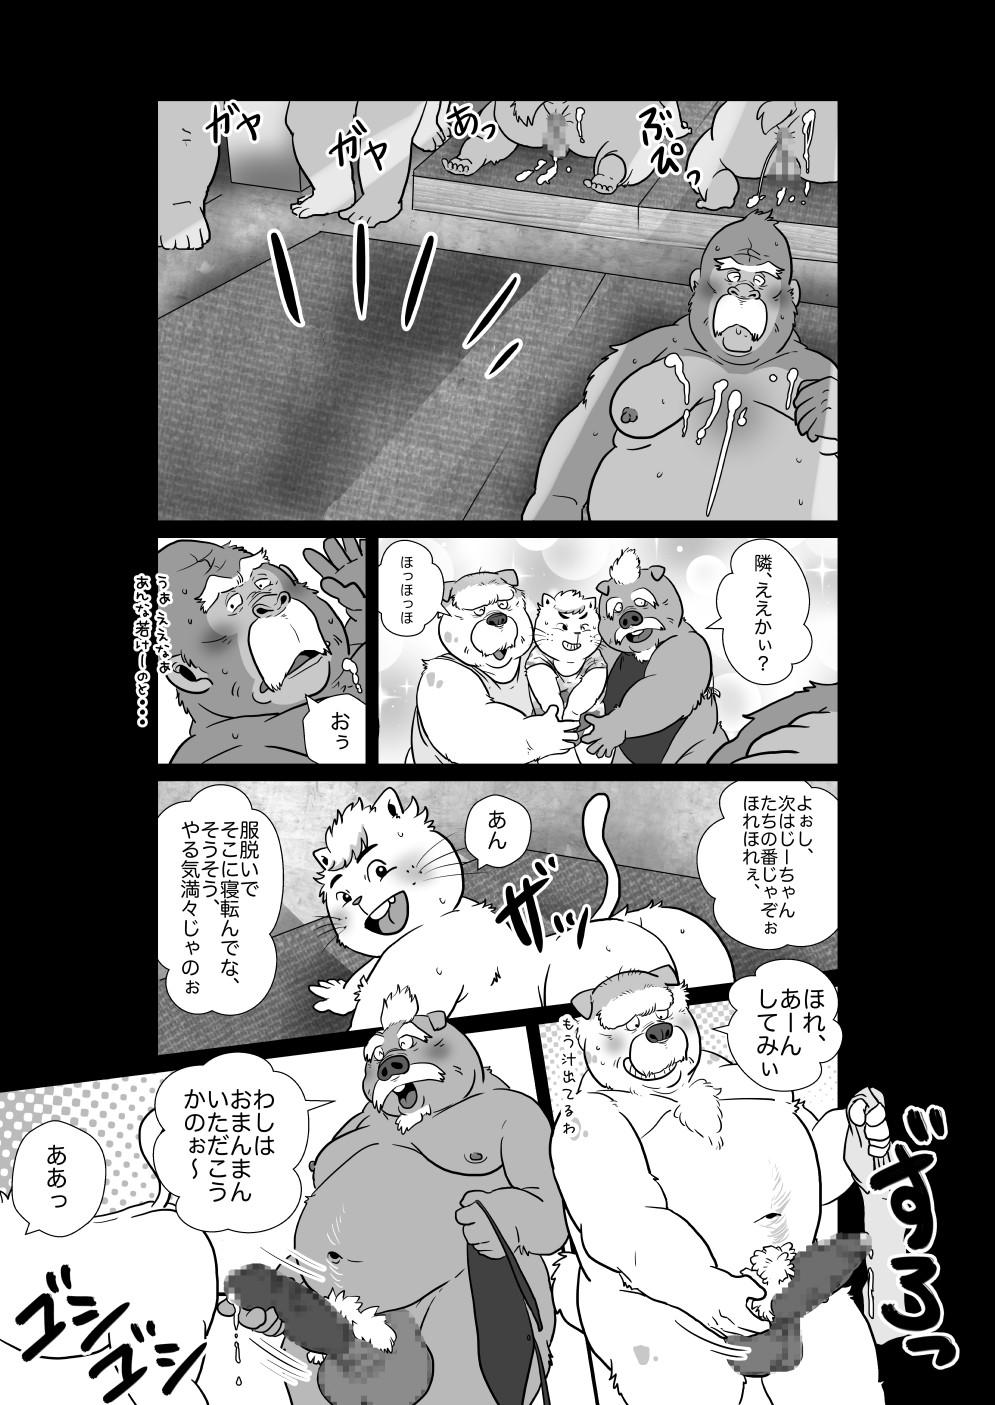 Mom 【ハッテンビーチ】ふぃすとふぁっく【ケモホモ注意】 Parties - Page 11